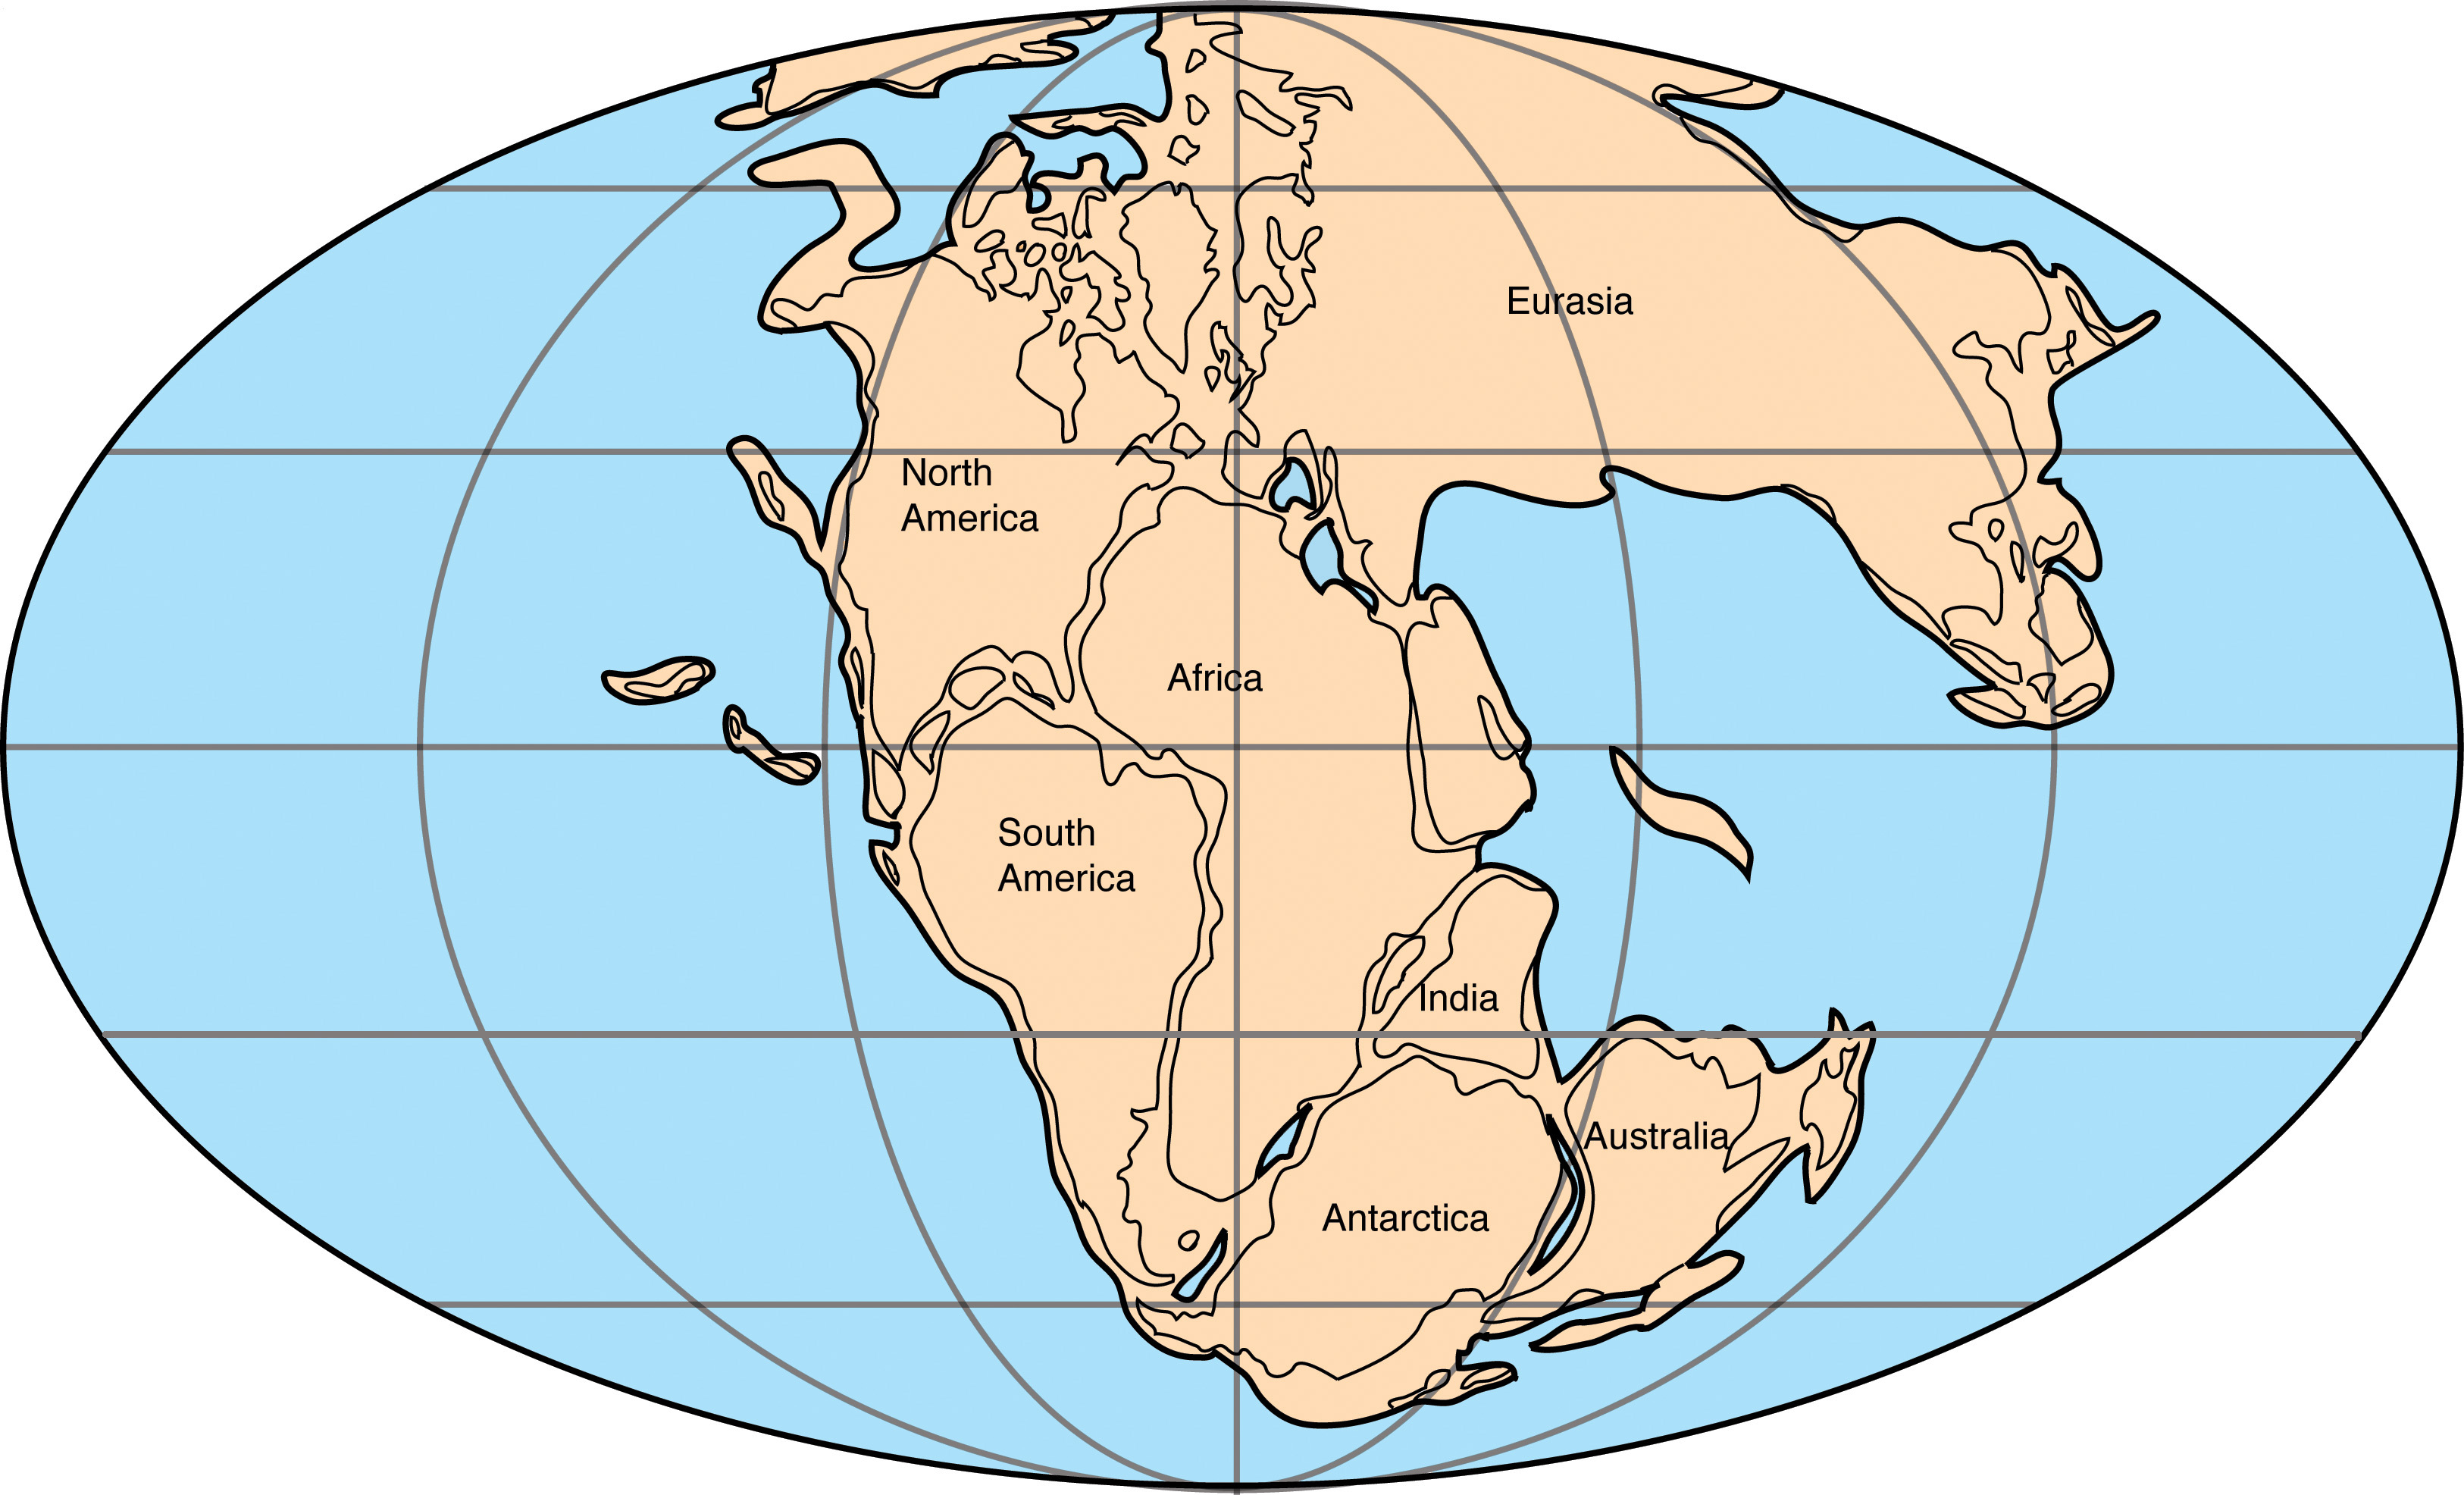 old map of the world before continental drift Pangaea Plate Subduction And Ancient Civilizations Chapter 22 old map of the world before continental drift